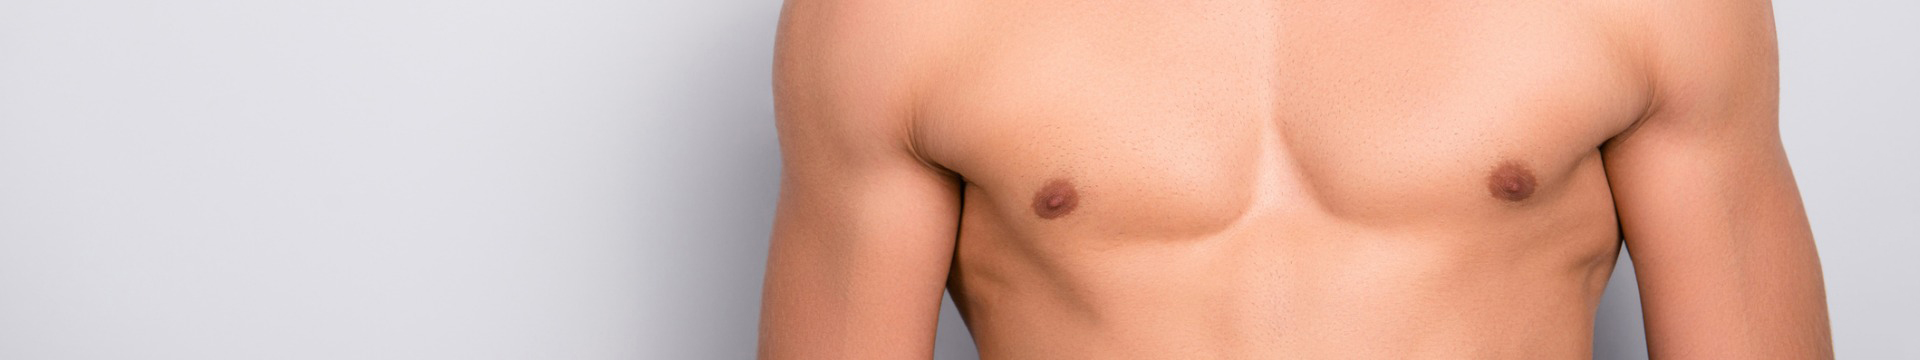 Male Breast Reduction (Gynecomastia) Surgery in New York & New Jersey